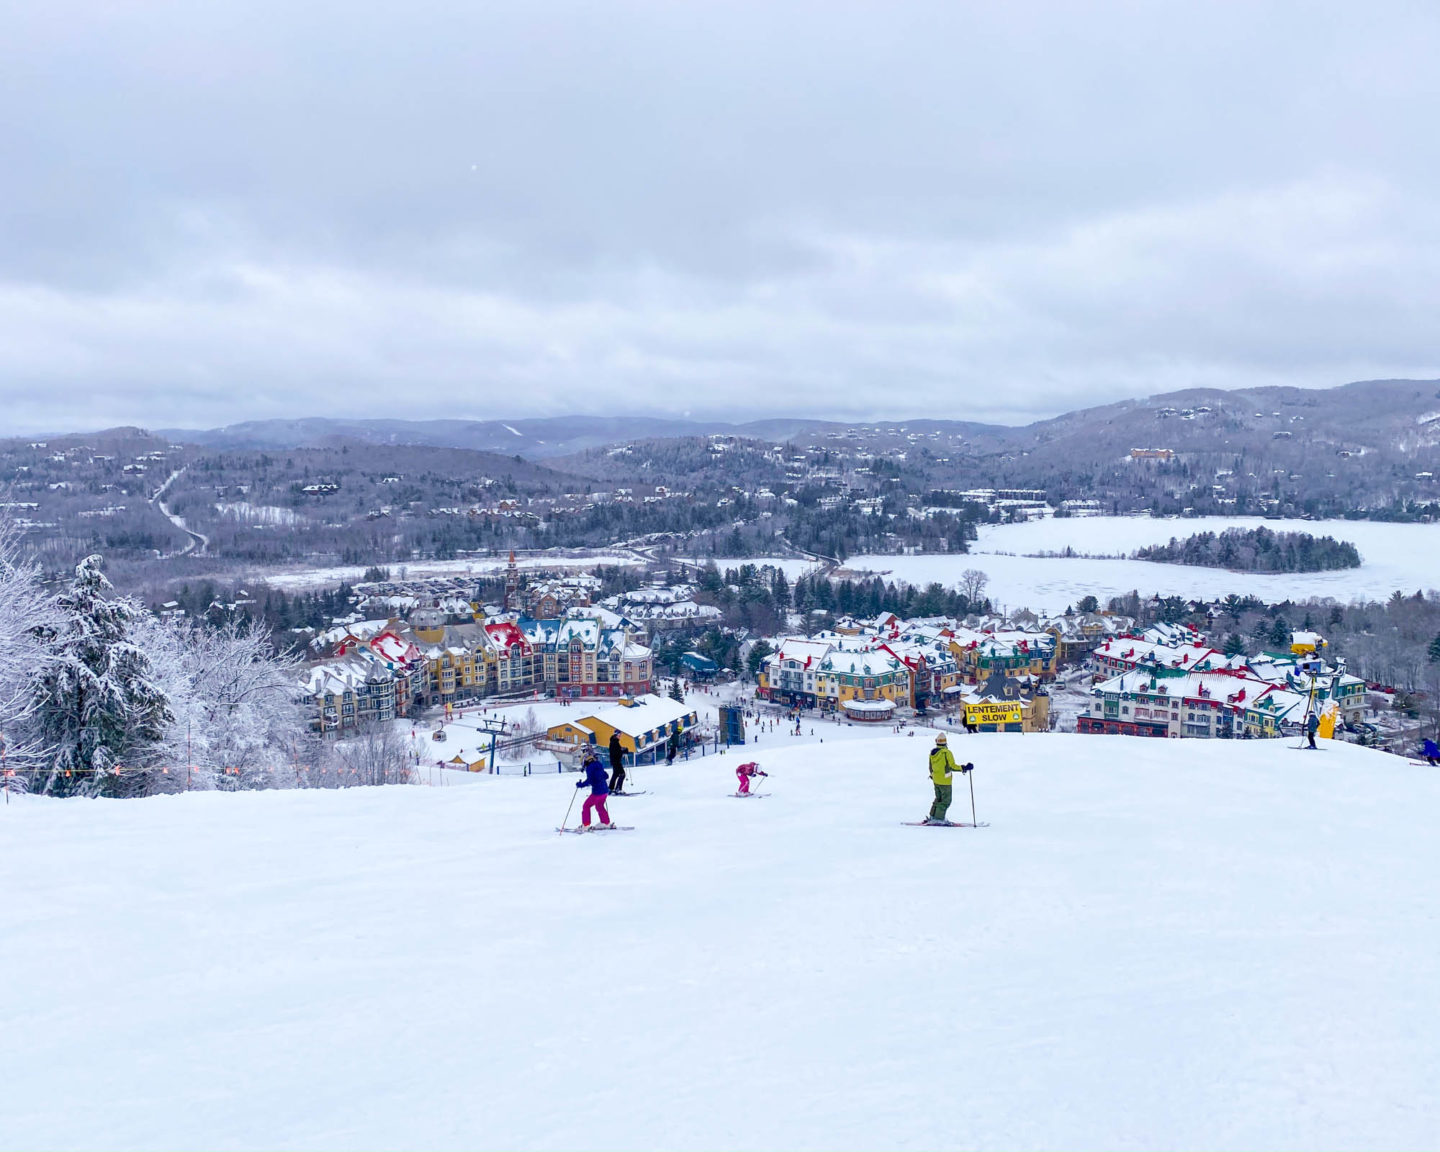 The most magical ski trip to Mont-Tremblant